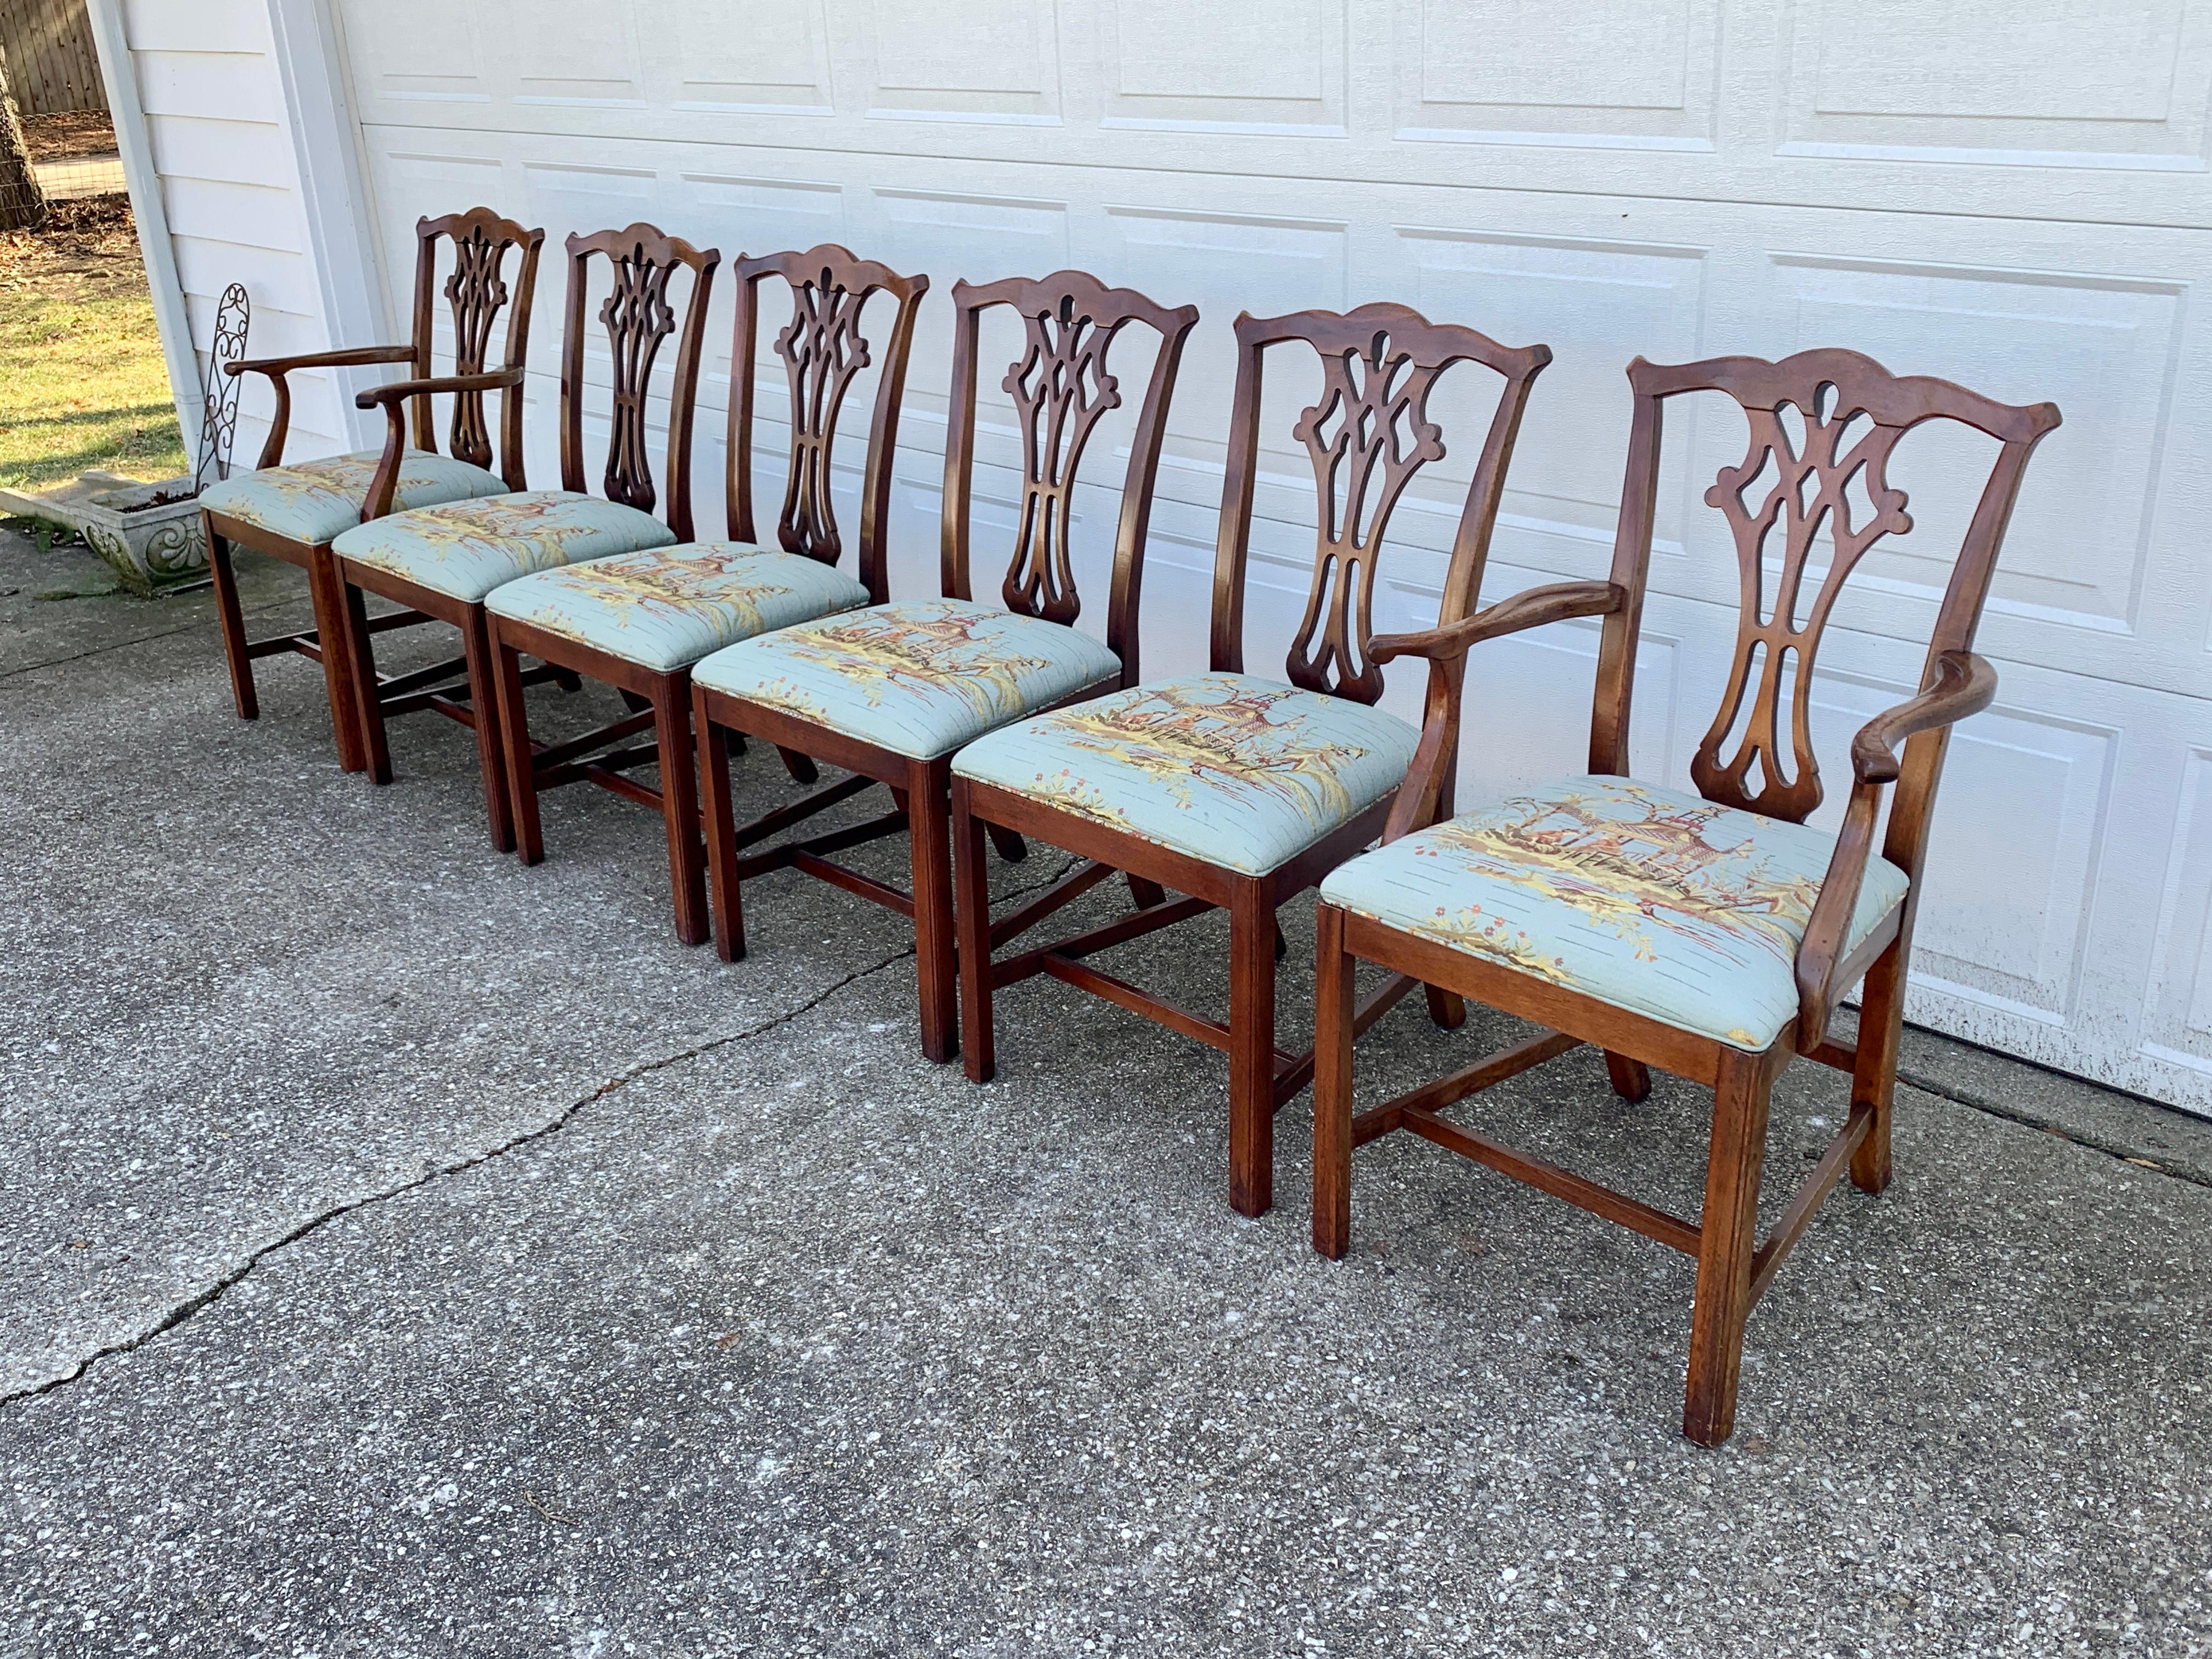 A gorgeous set of six Chippendale style dining chairs

In the manner of Baker Furniture

USA, Late 20th Century

Carved solid mahogany frames with chinoiserie patterned upholstered seats.

Measures:
Side chairs - 20.5